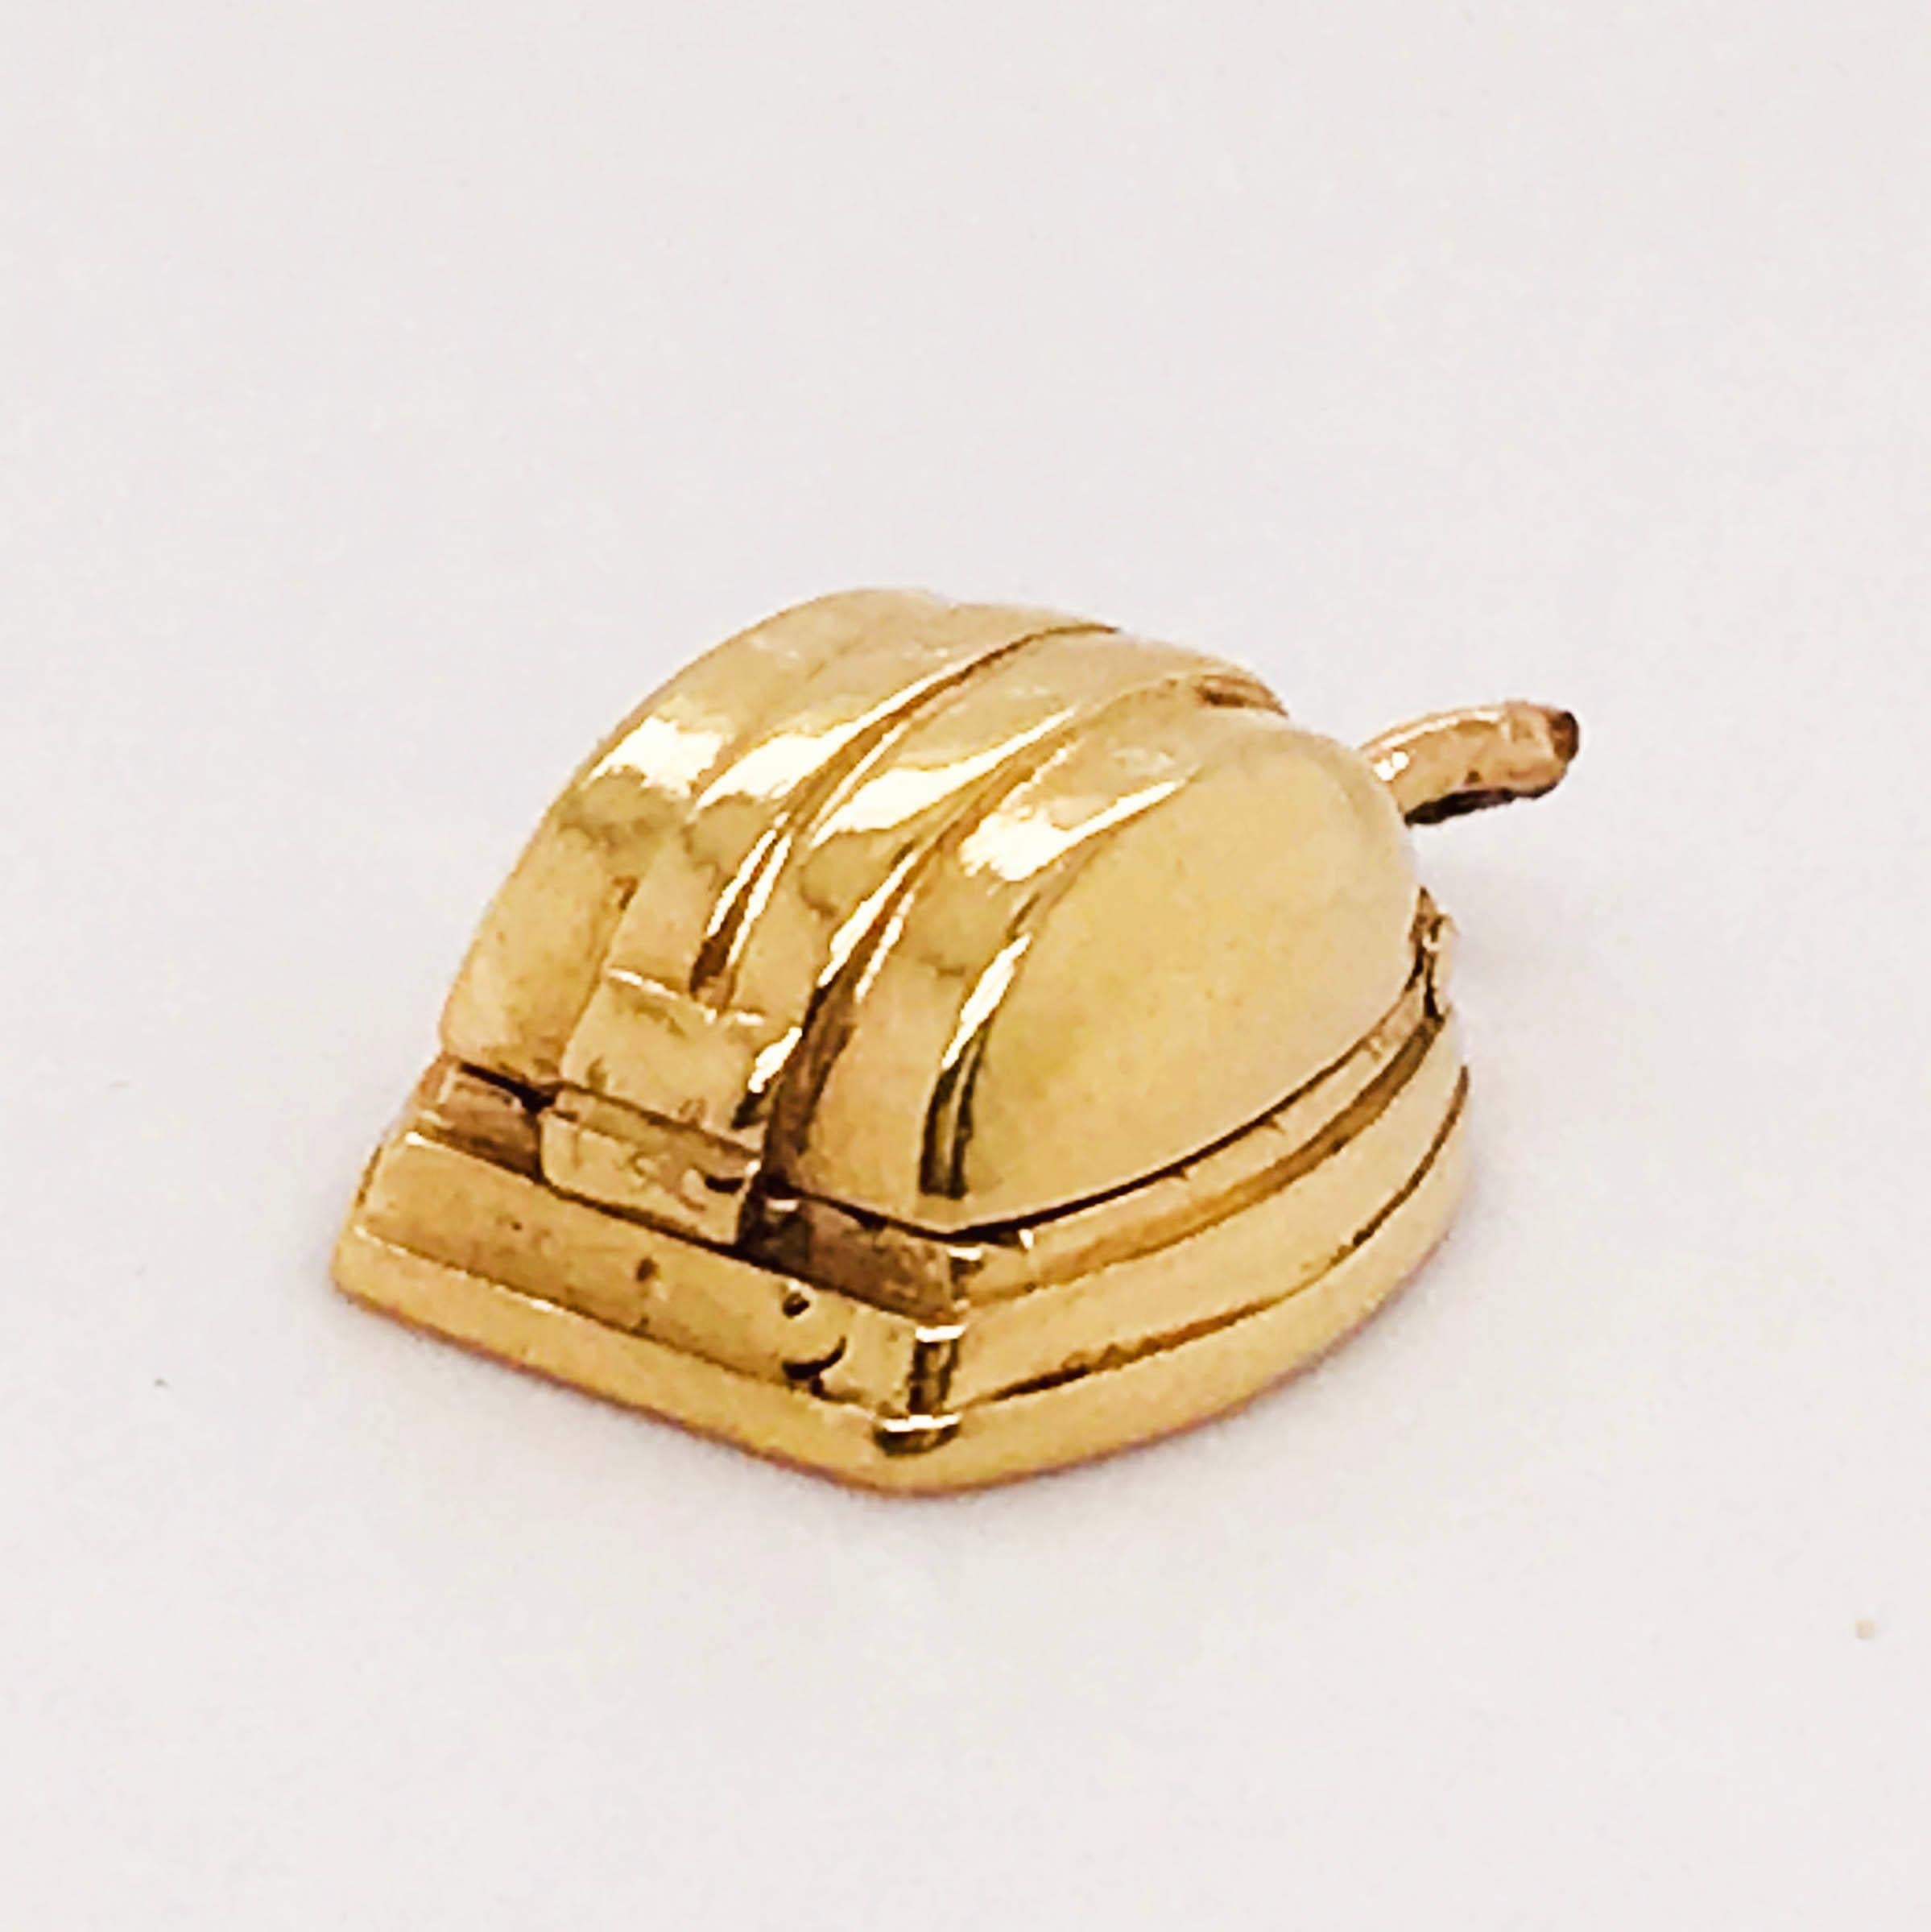 Retro 1972 Diamond Solitaire Ring and Ring Box Charm in 14 Karat Gold, Vintage Piece